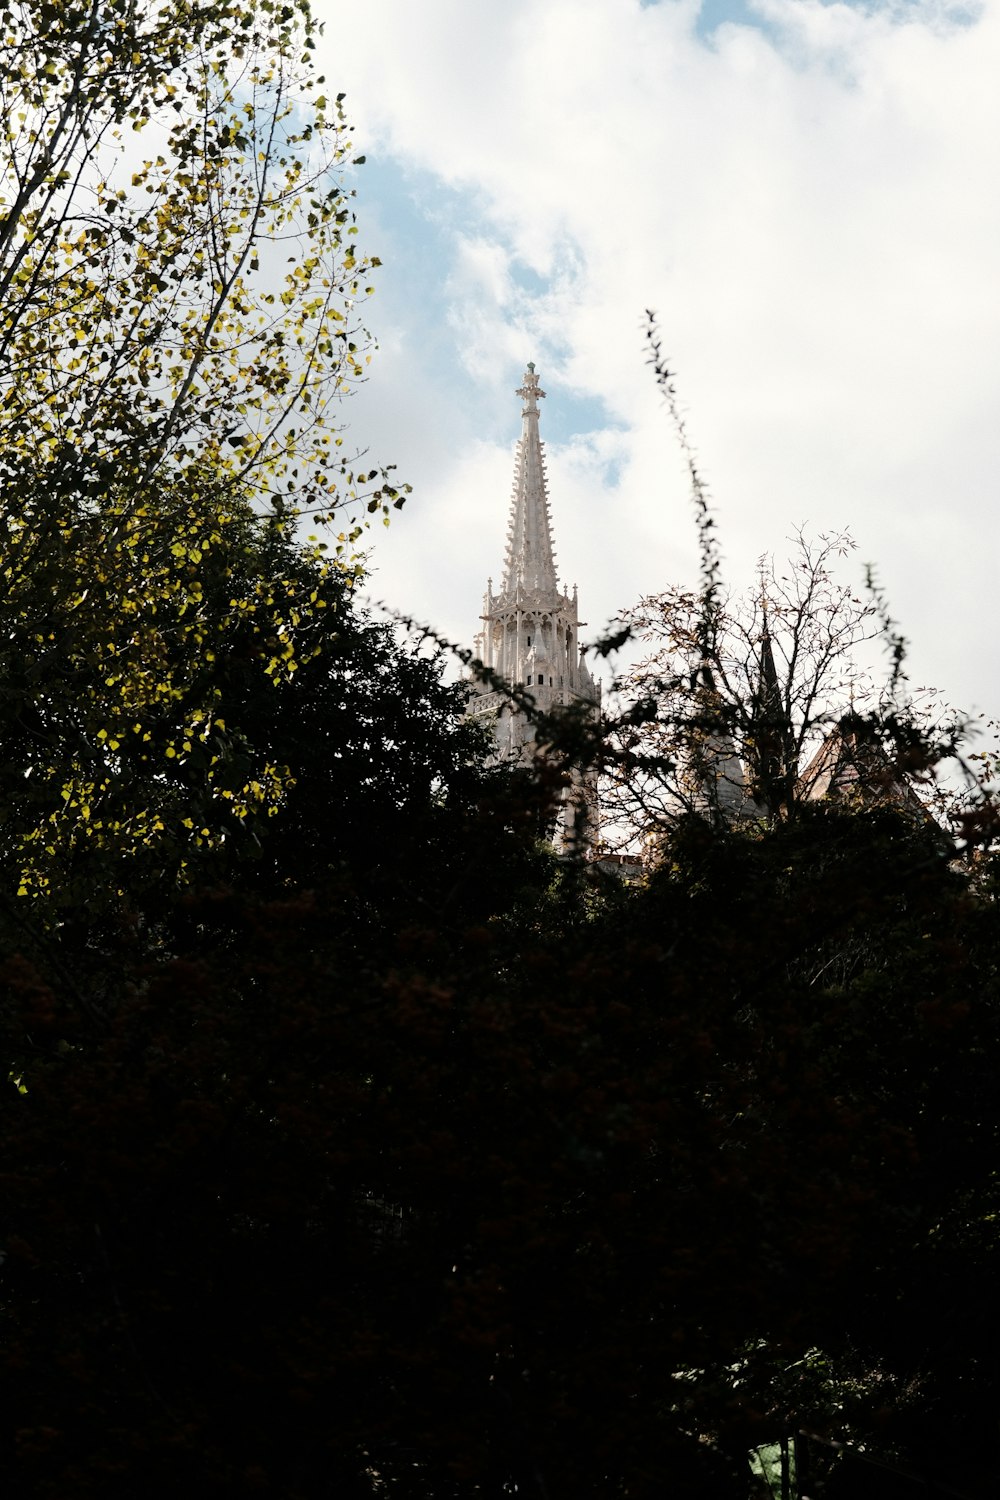 the spire of a church is seen through the trees